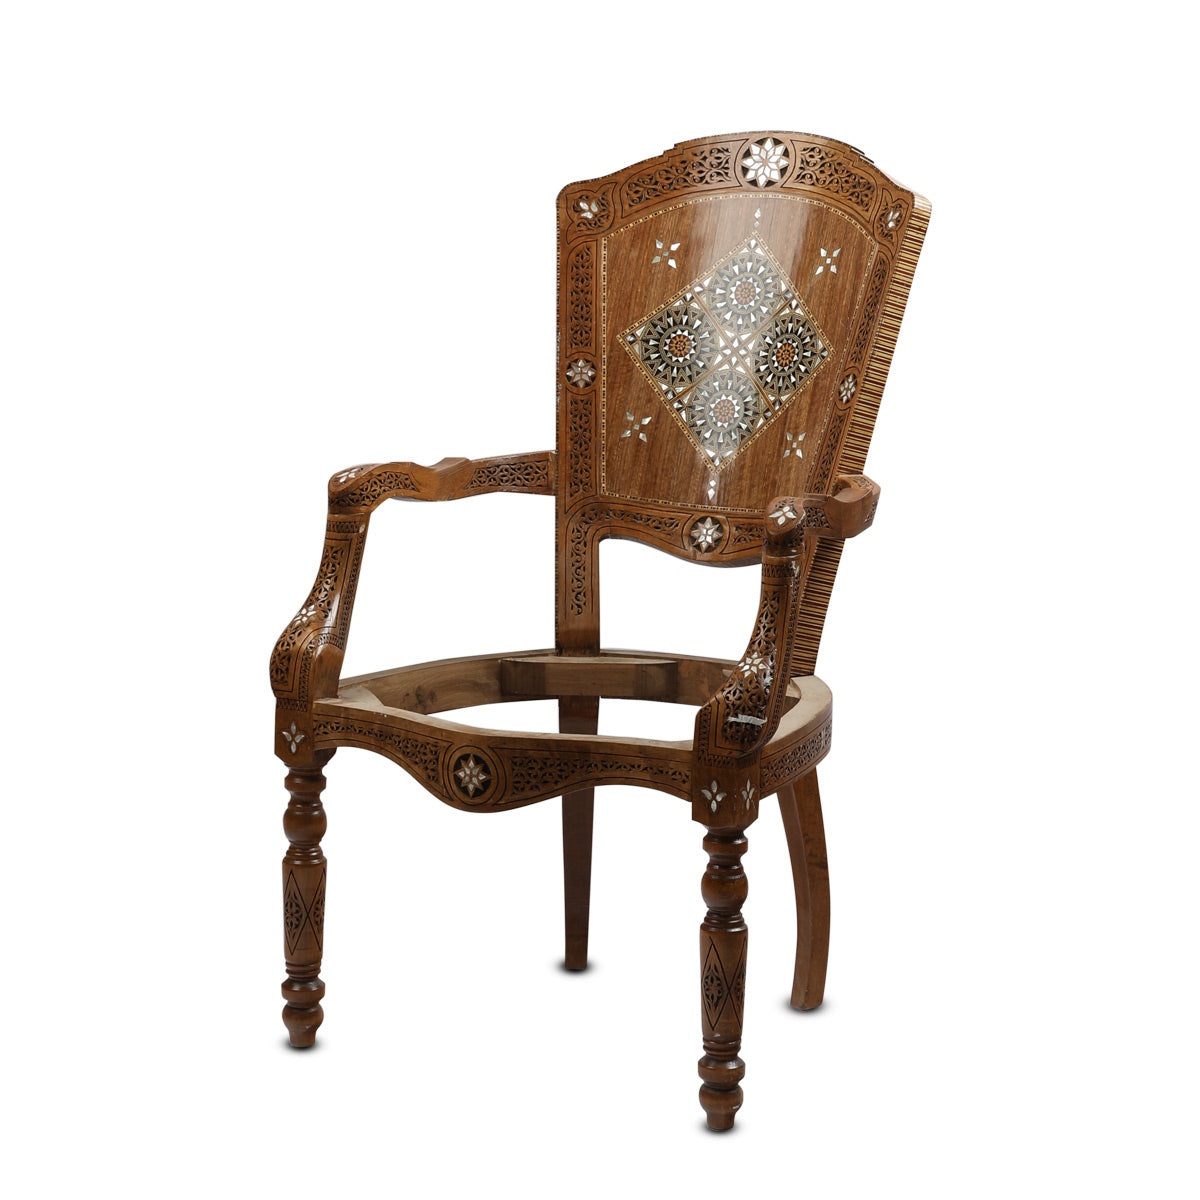 Angled Side View of Mother of Pearl Inlaid Mosaic Wood Chair